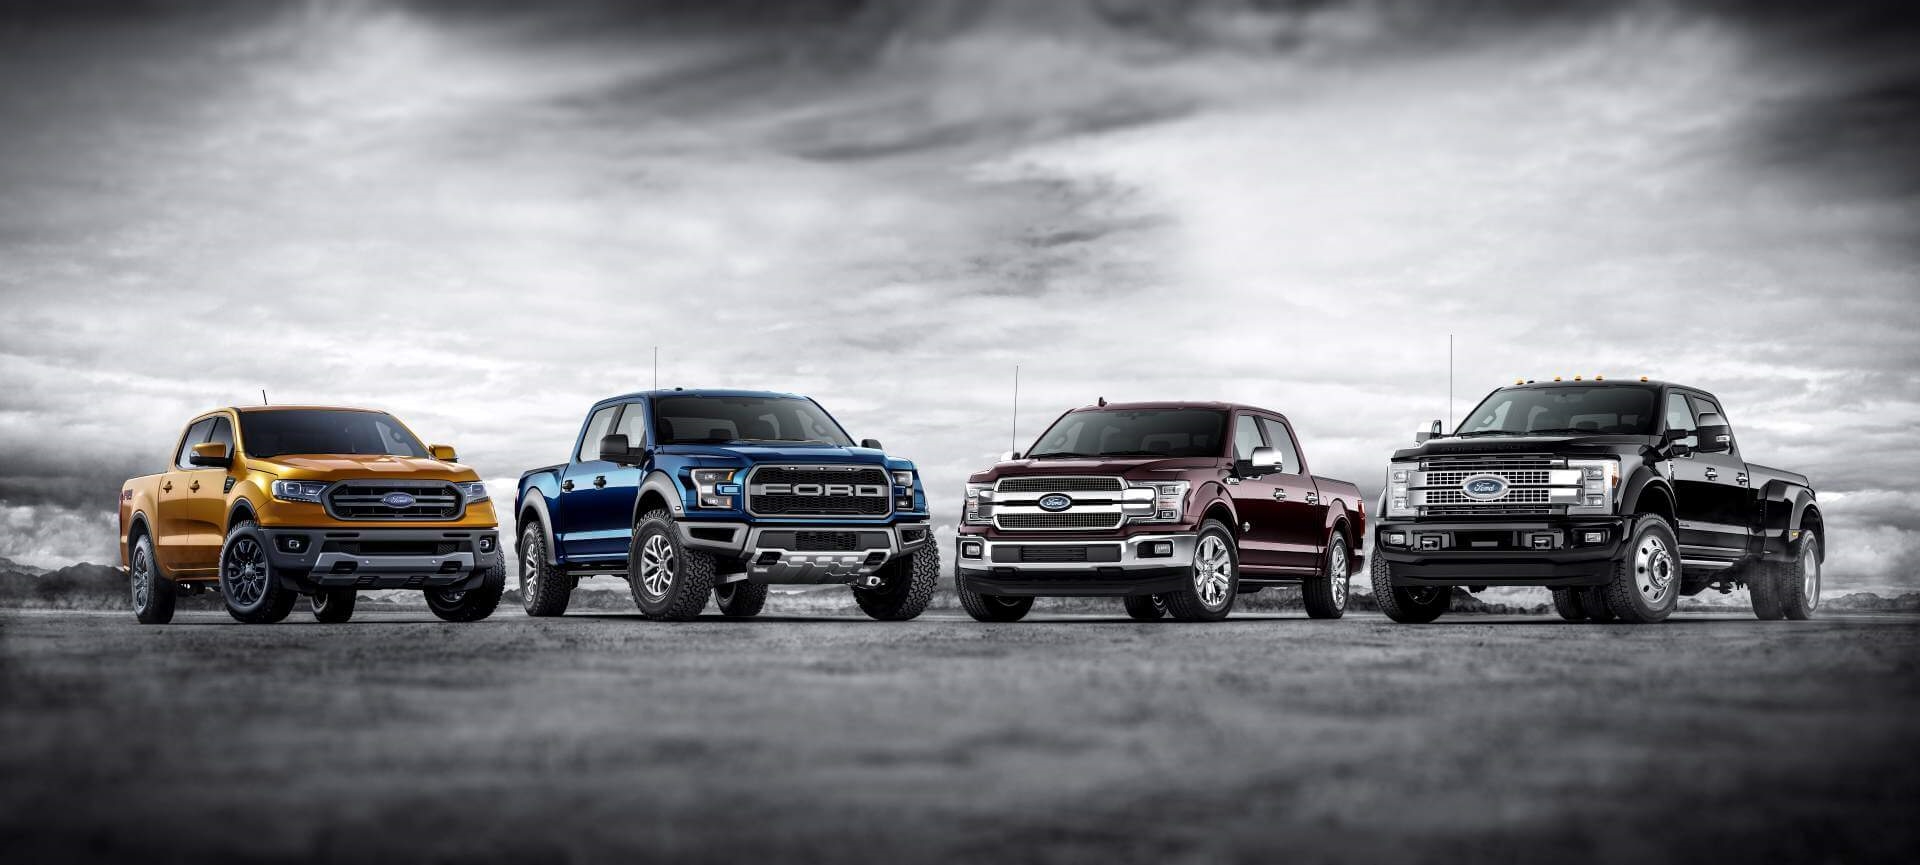 lineup of exciting Ford trucks where you can find the best turbo diesel engines inside with each year's newest release